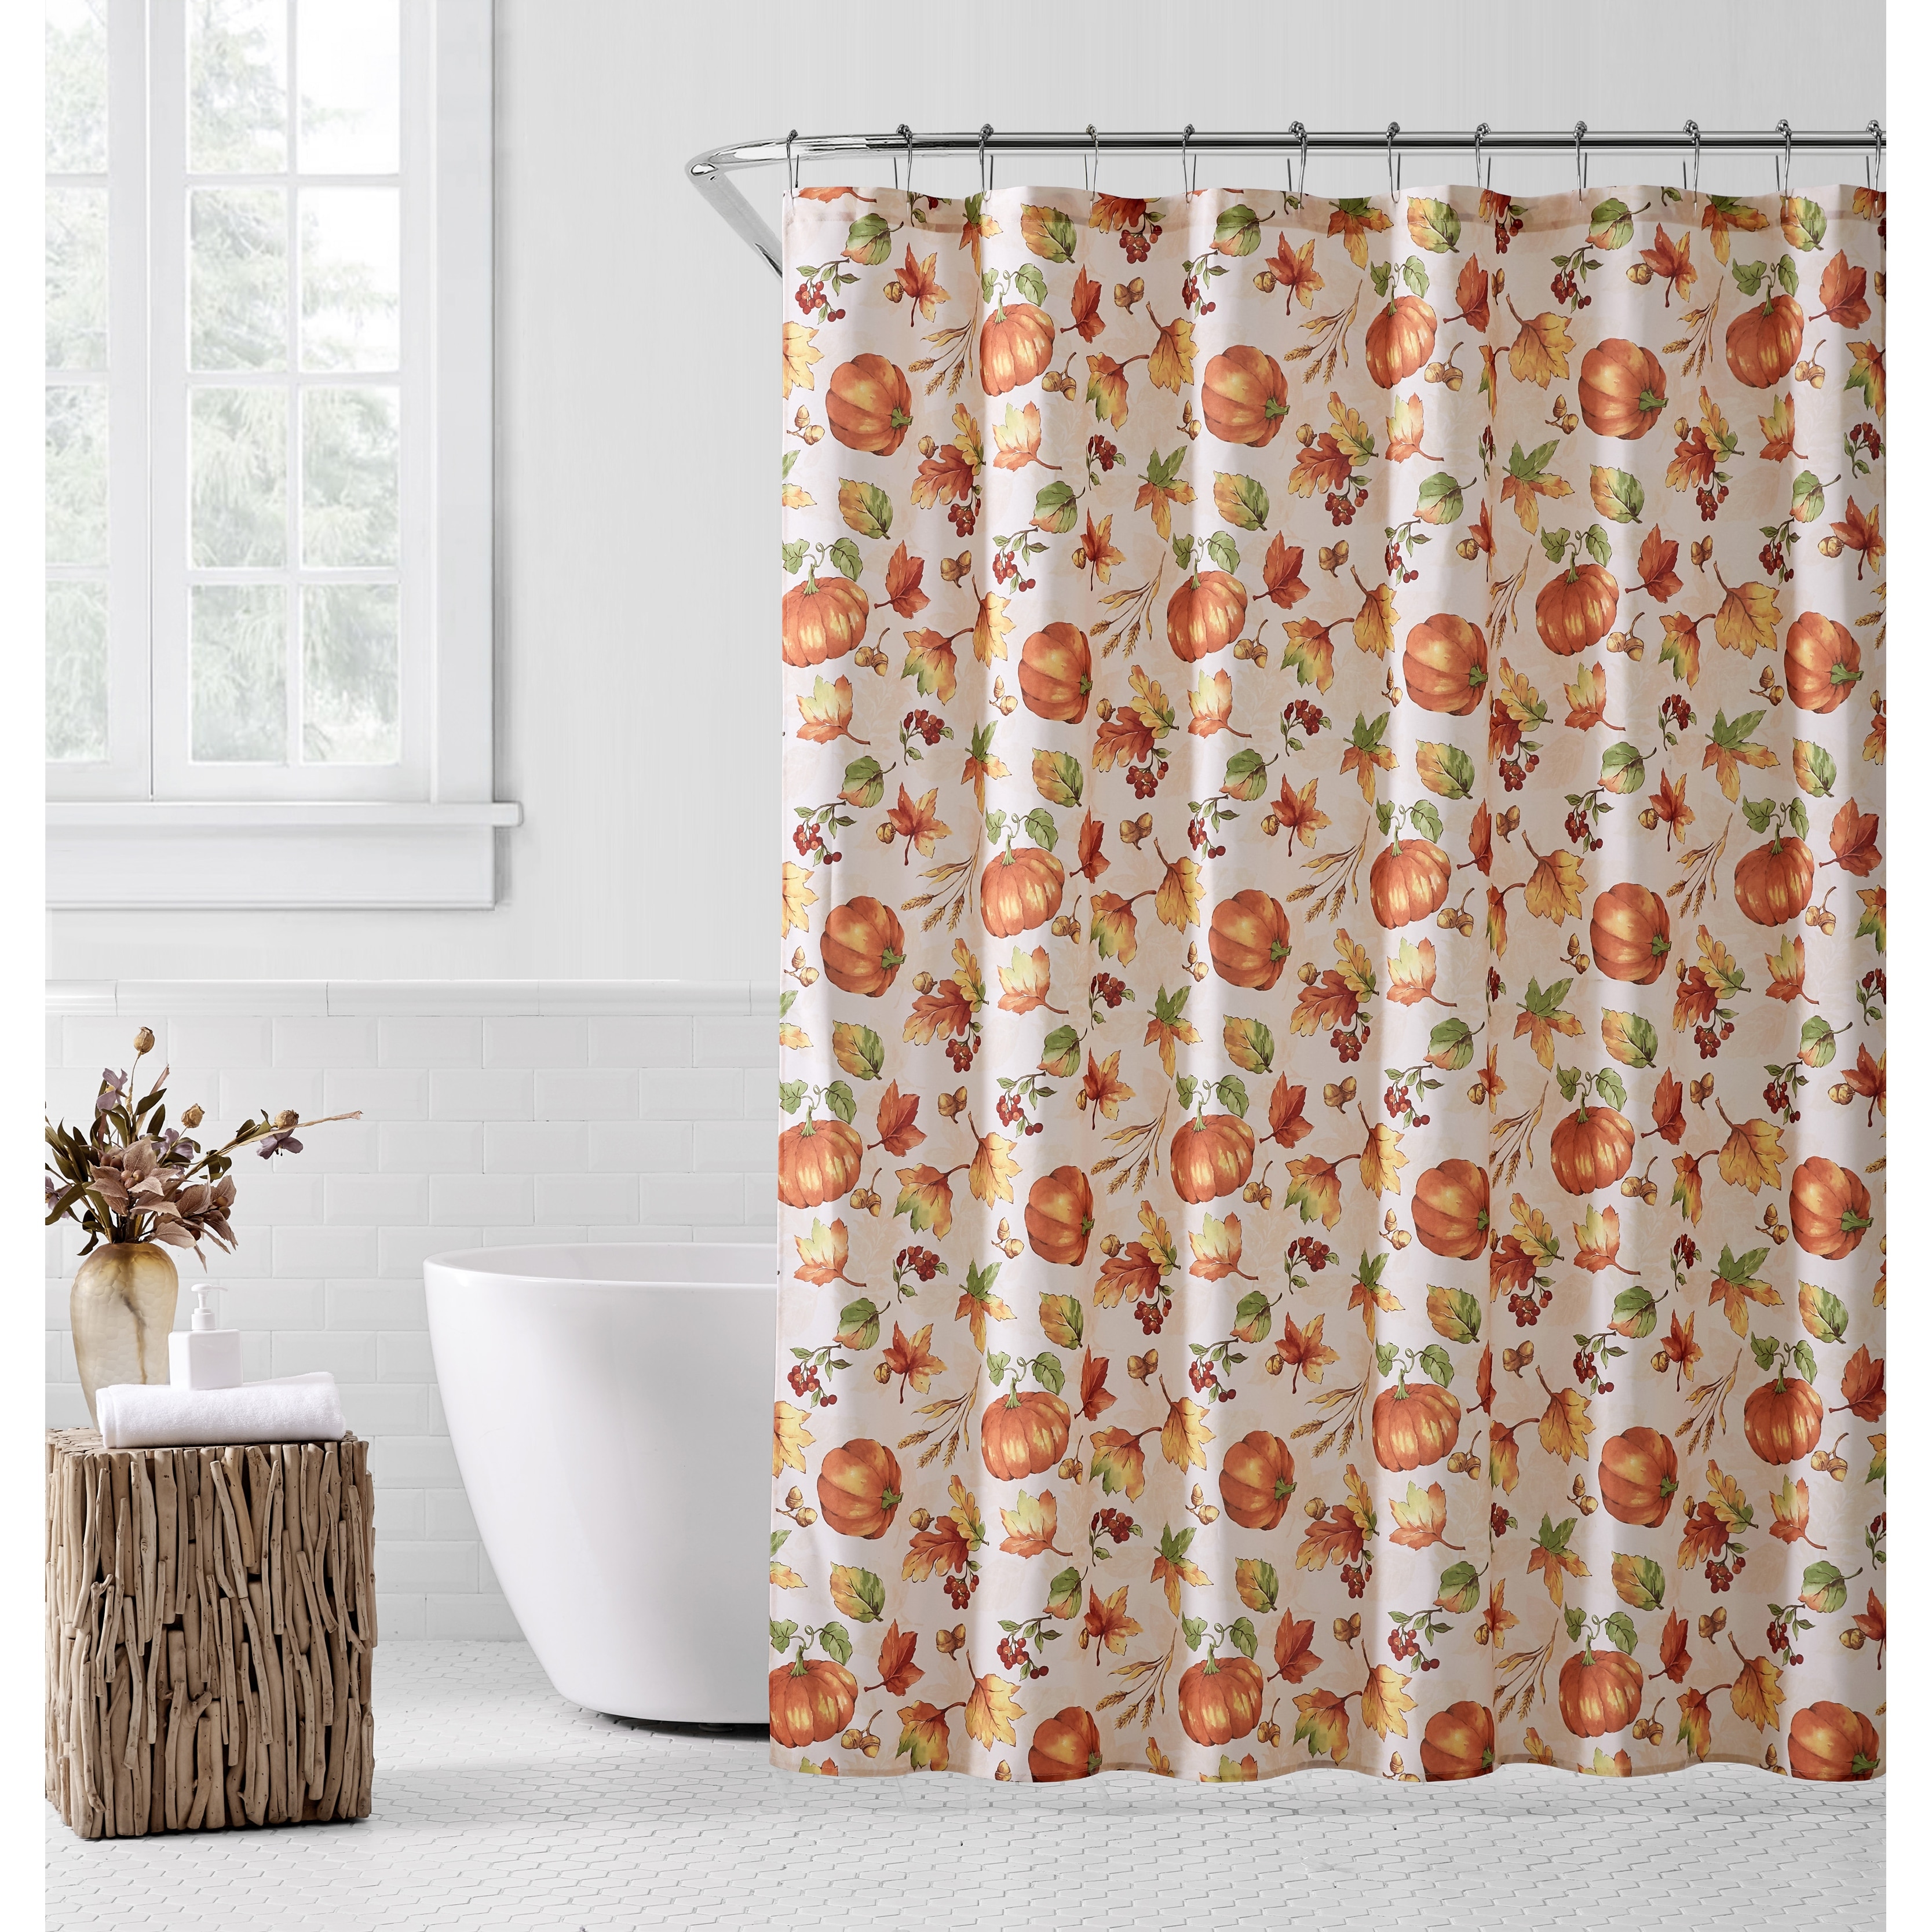 https://ak1.ostkcdn.com/images/products/is/images/direct/0f2f26a5e896fe0bccce5979ca6cdedc54196618/Fall-Pumpkin-Design-Long-Shower-Curtain.jpg